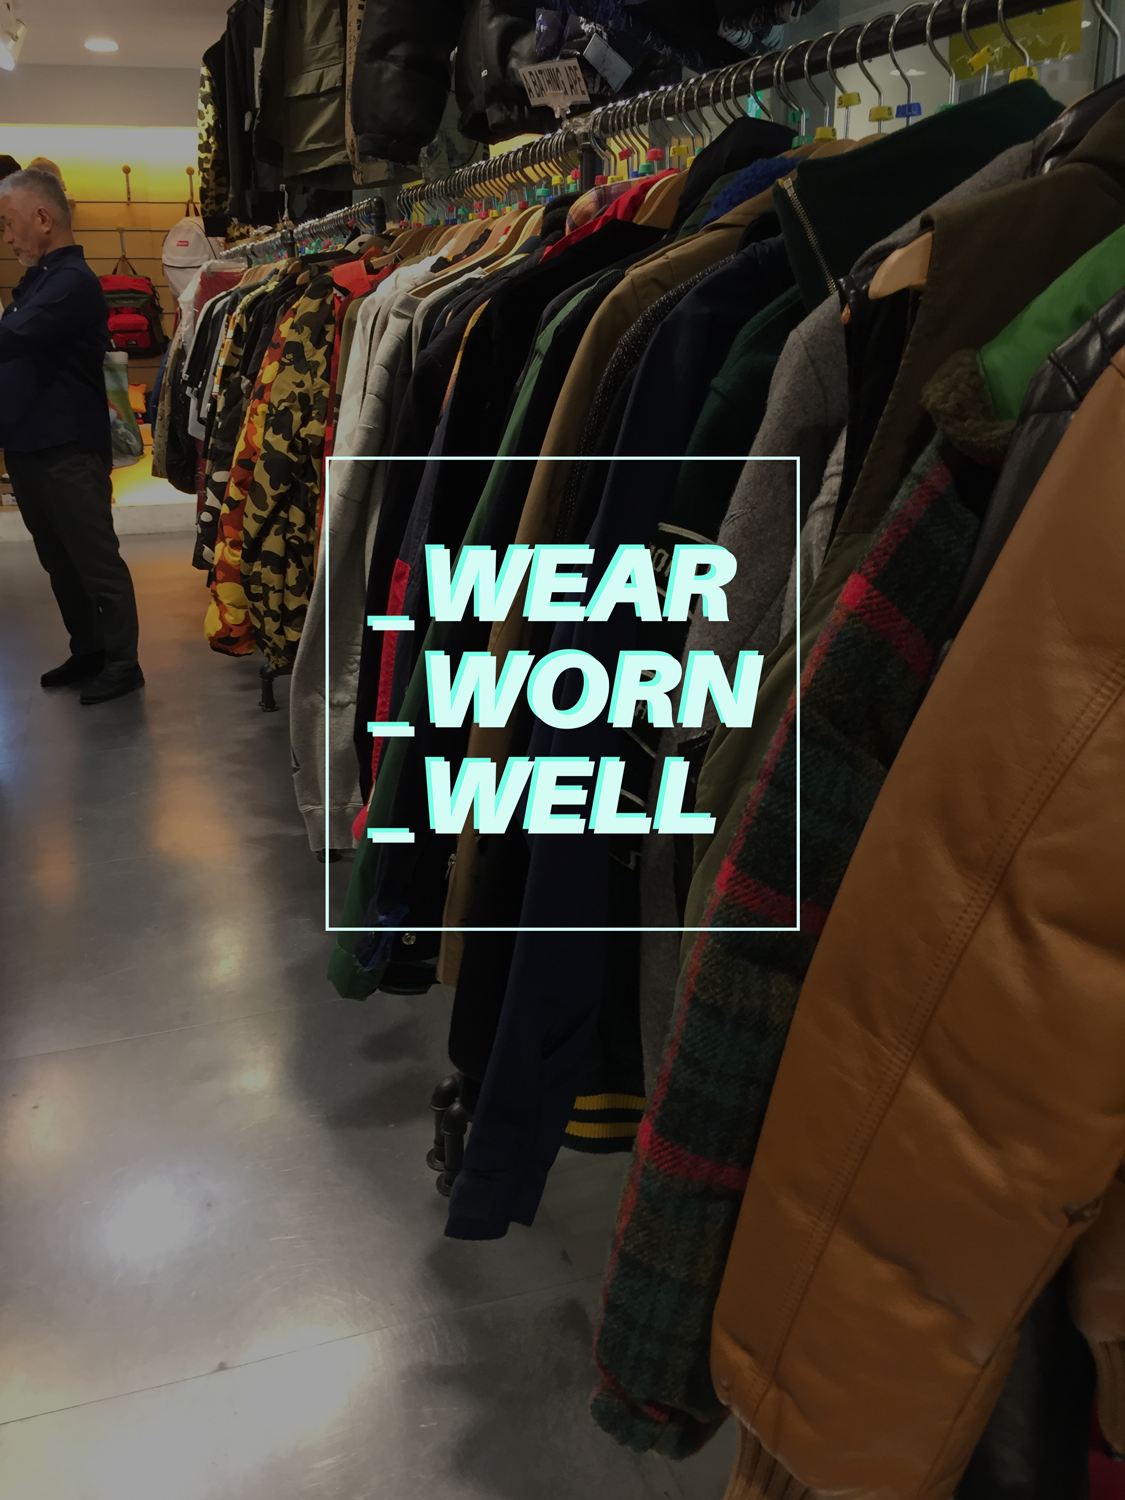 Curation is the key to changing fashion behaviours | by Alan Bryant |  WearWornWell | Medium